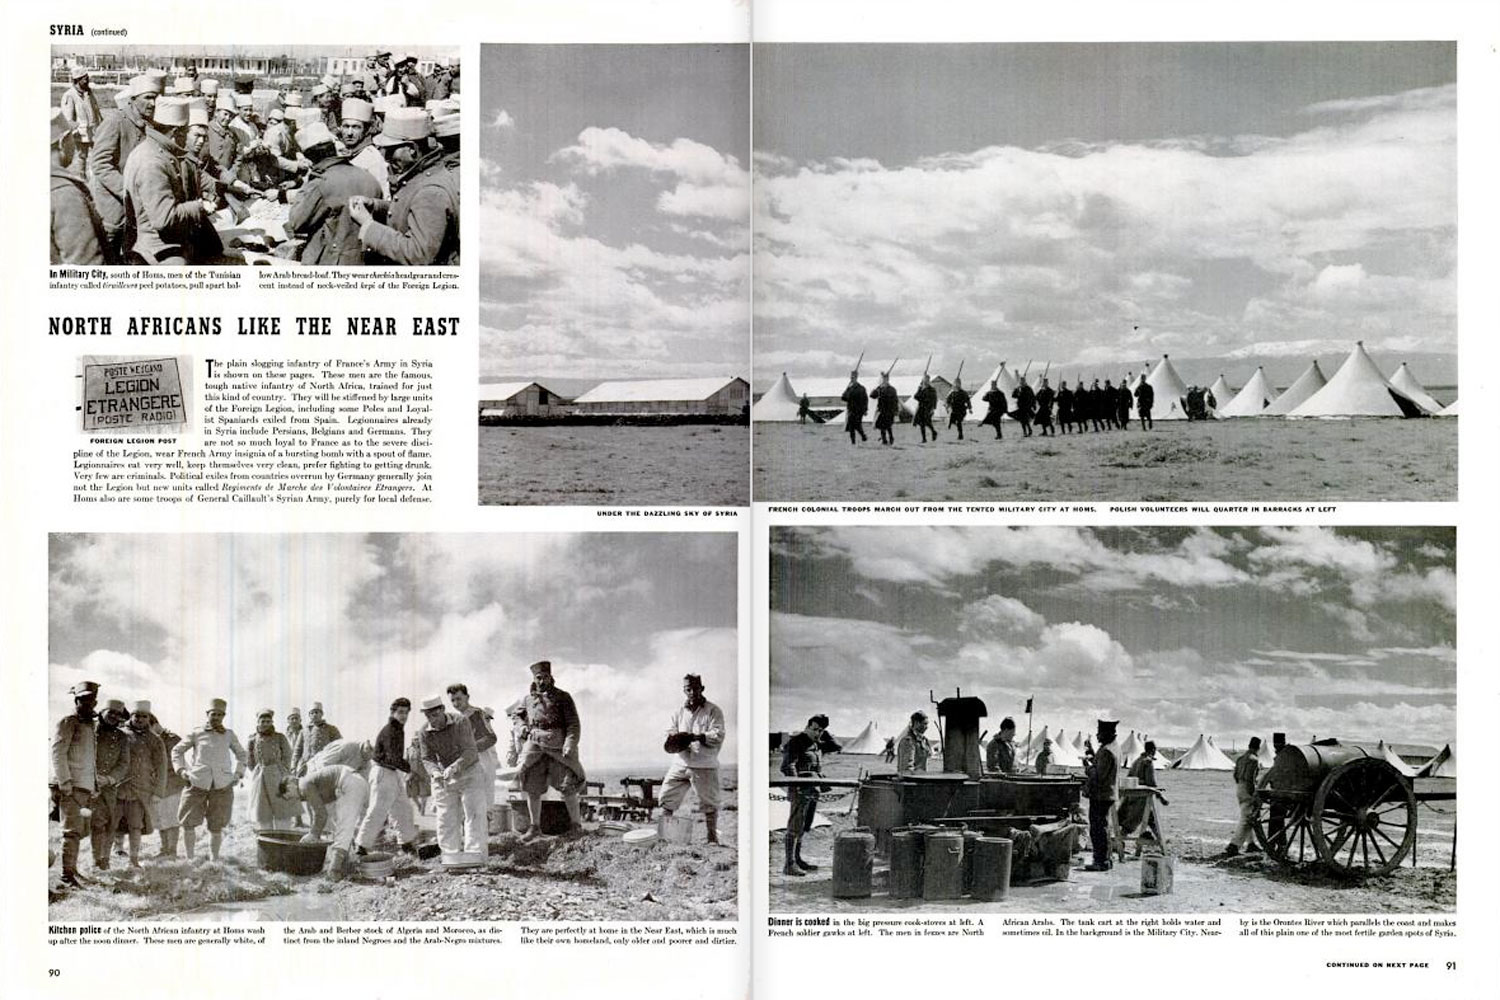 Page spreads, LIFE magazine, May 20, 1940